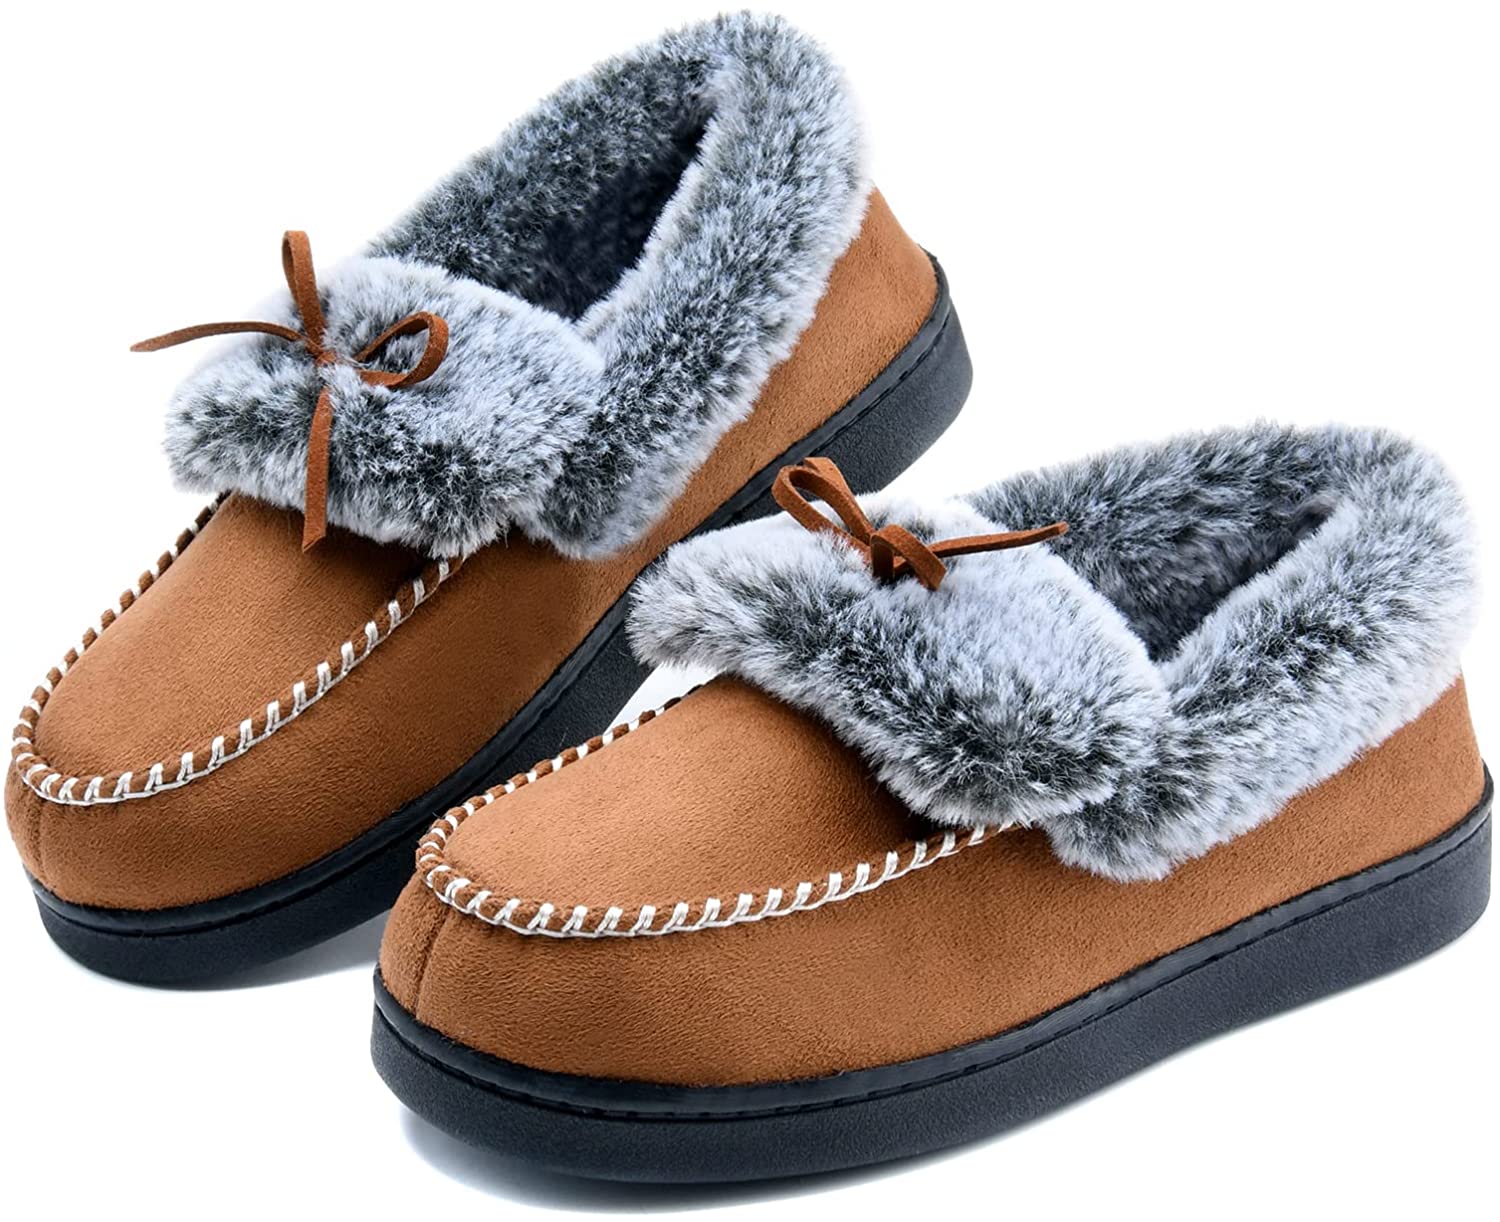 Womens Moccasins Slipper faux Fur Fluffy Suede Ladies Slip on Leather Soft Shoes 